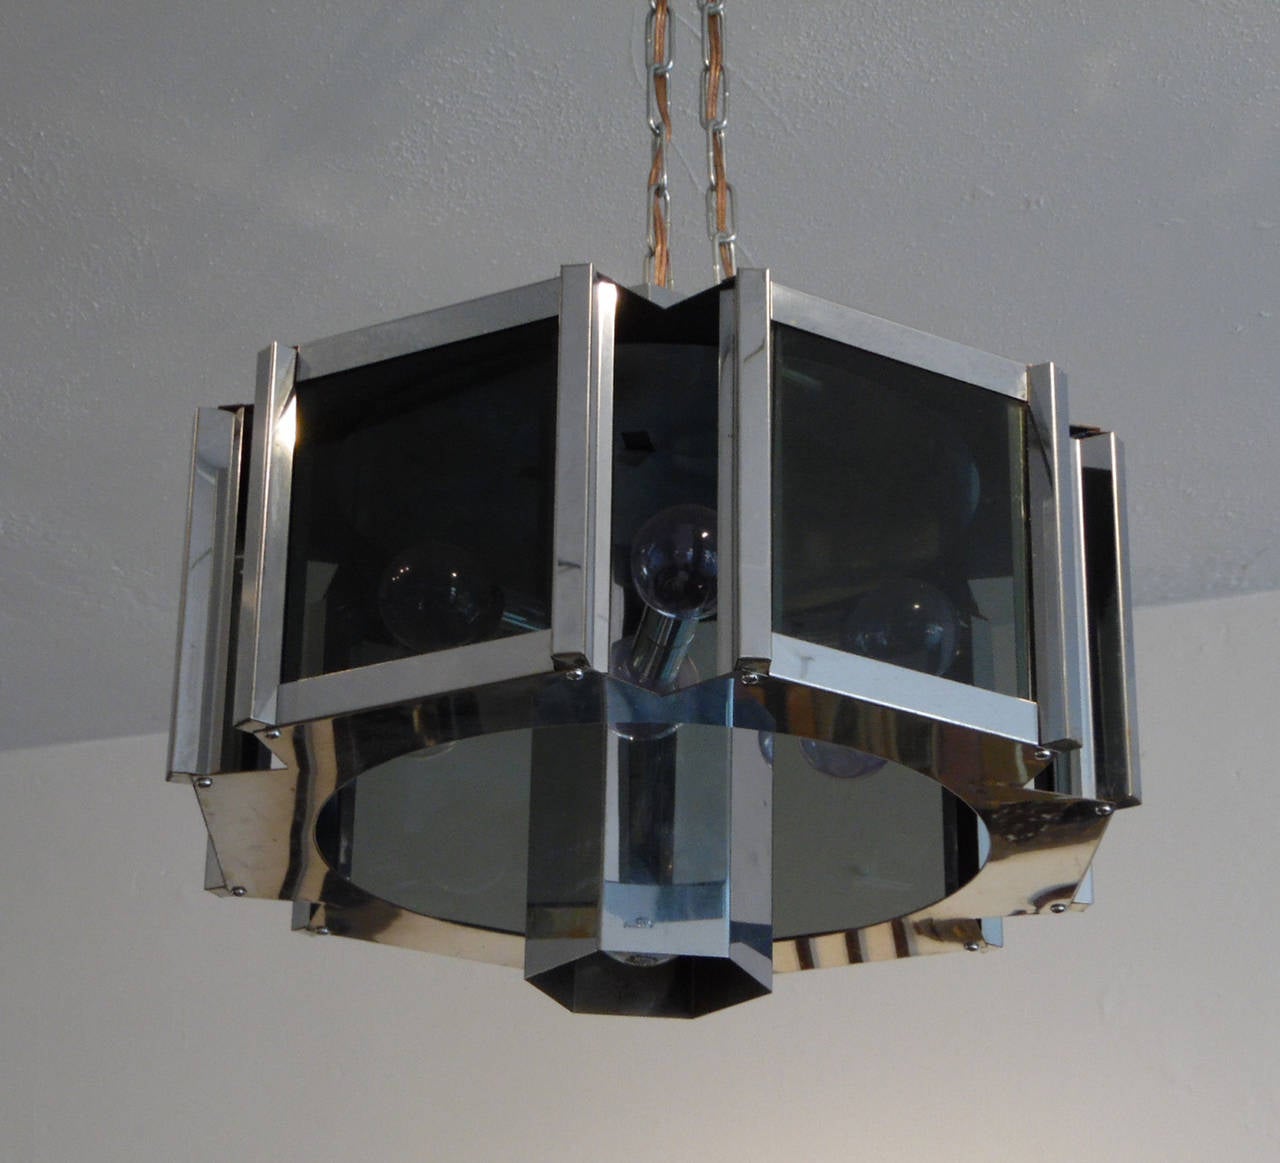 Beautifully designed modernist chandelier by Robert Sonneman holding six bulbs behind six smoked glass lenses and one downlight bulb. Comes with 36" of chrome chain attached to the top of the chandelier for hanging.